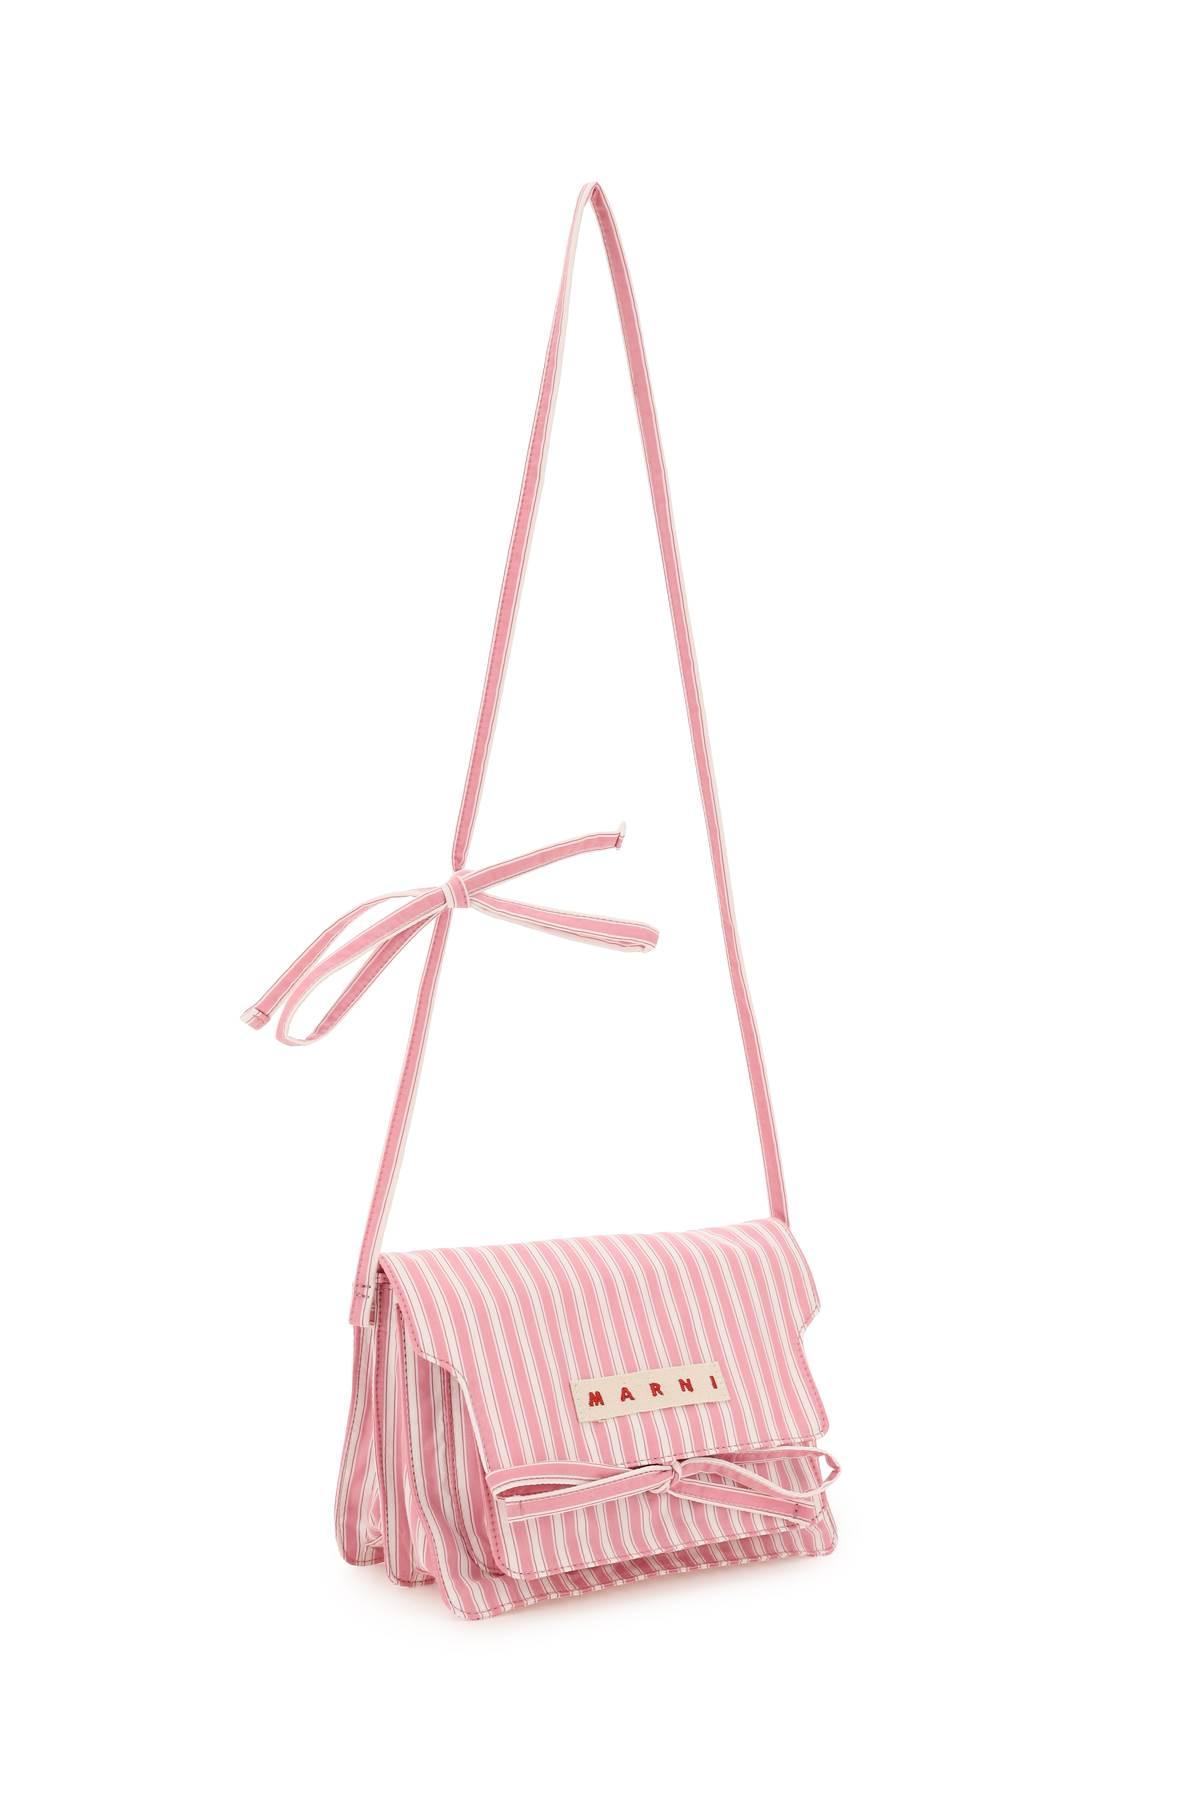 Marni Striped Canvas Medium Trunk Bag in Pink,White (Pink) | Lyst